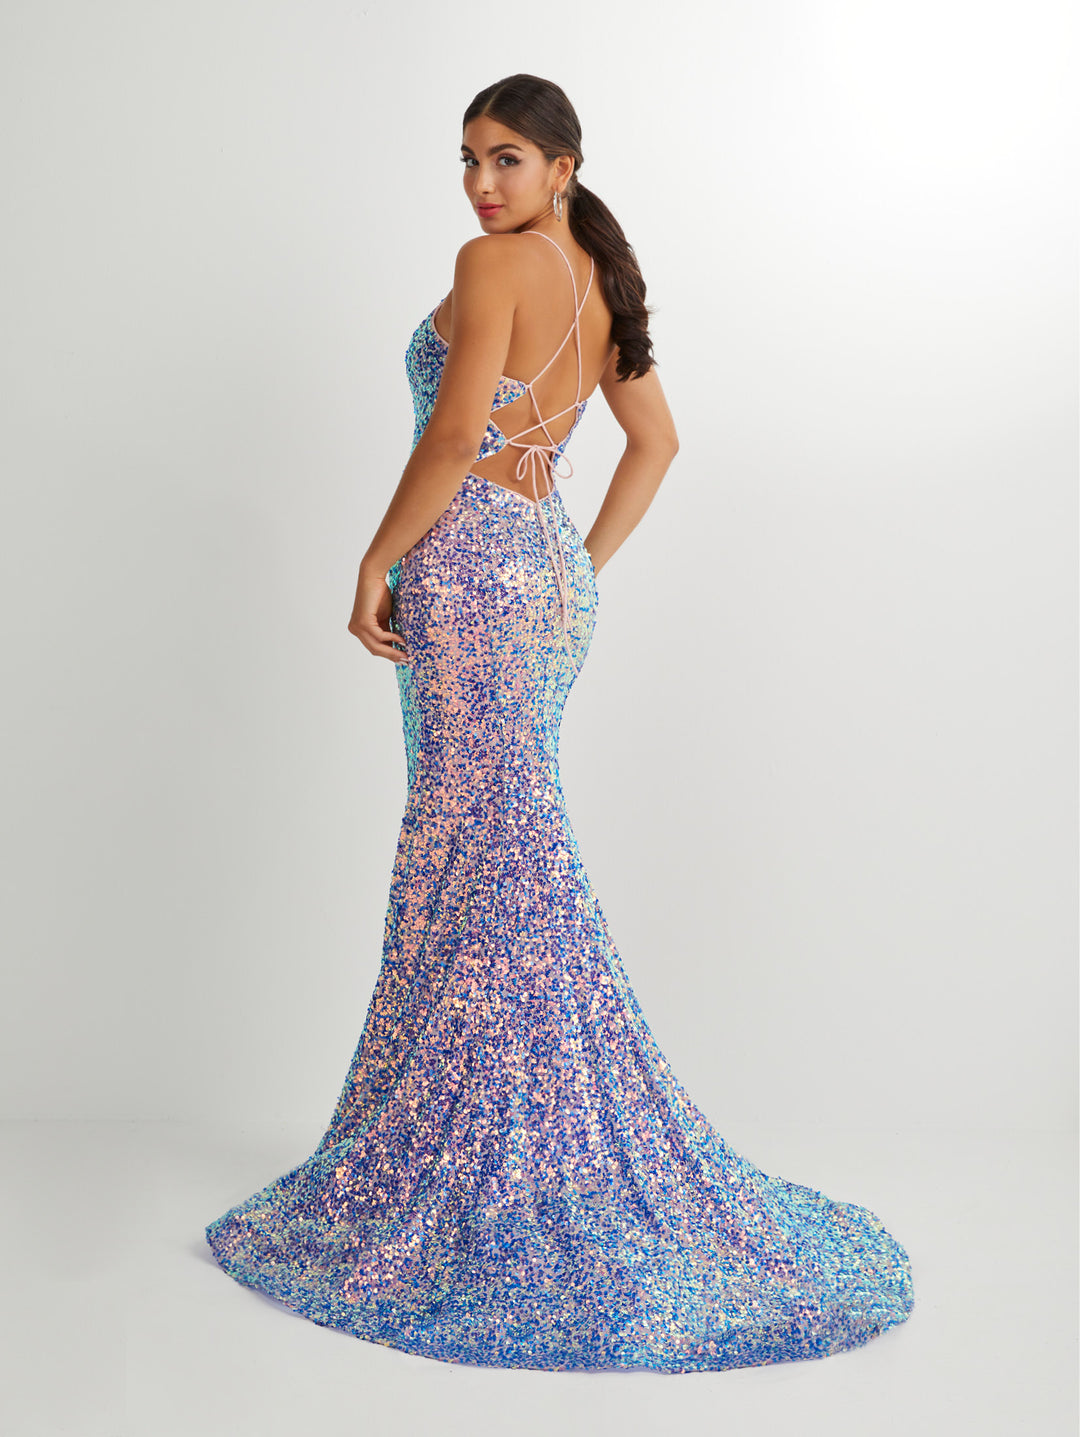 Iridescent Sequin Strappy Back Mermaid Dress by Studio 17 12910